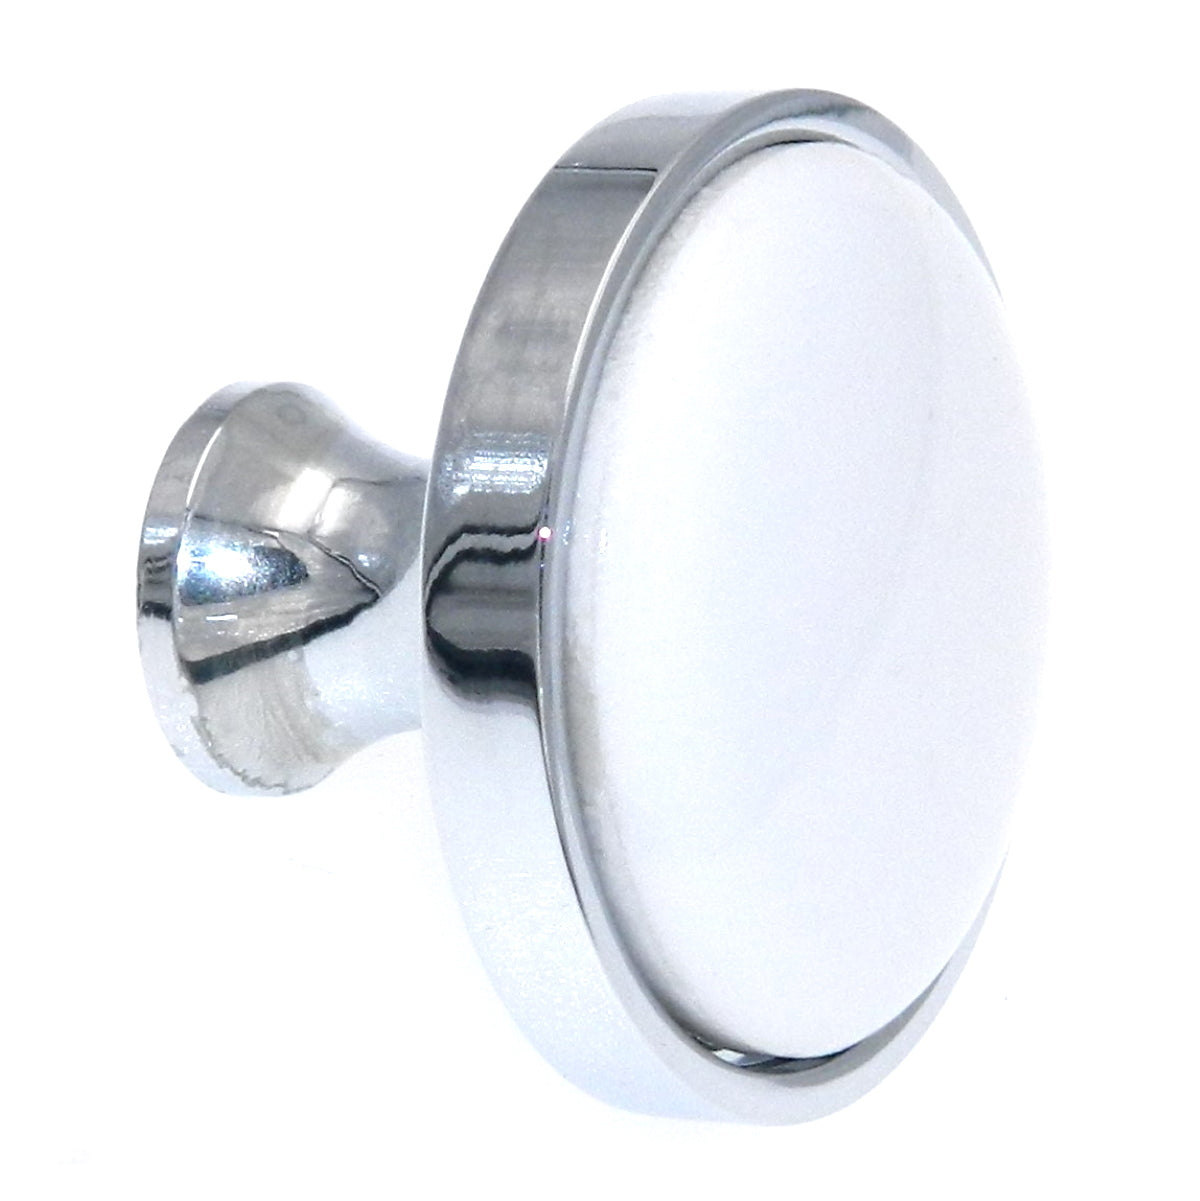 Hickory Hardware Milan Chrome Finished Solid Brass and White Porcelain 1 1/4" Cabinet Knob P9821-W